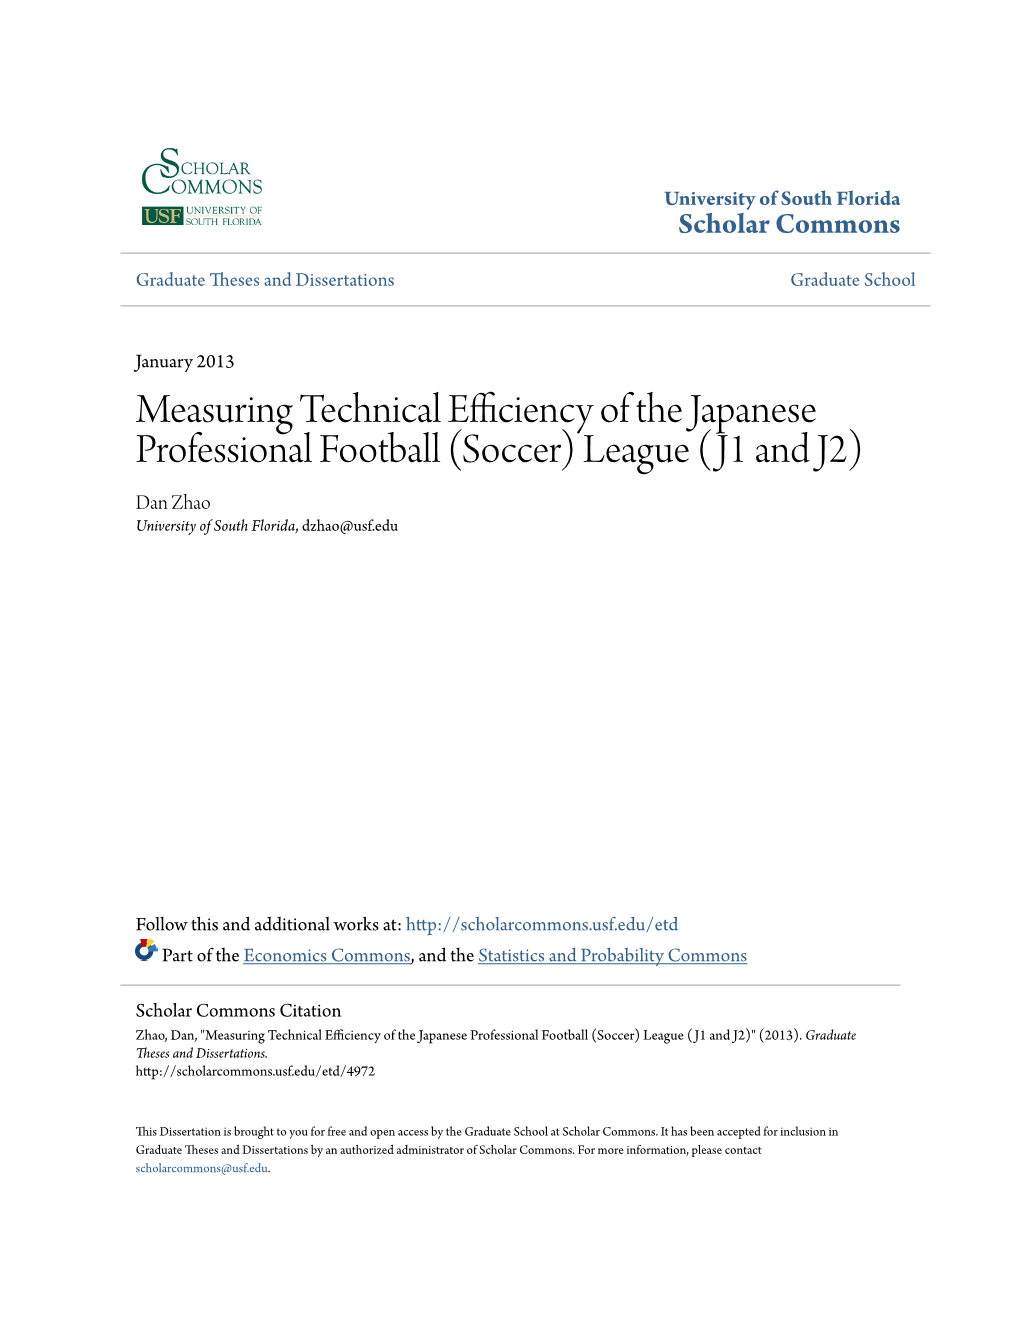 Measuring Technical Efficiency of the Japanese Professional Football (Soccer) League (J1 and J2) Dan Zhao University of South Florida, Dzhao@Usf.Edu